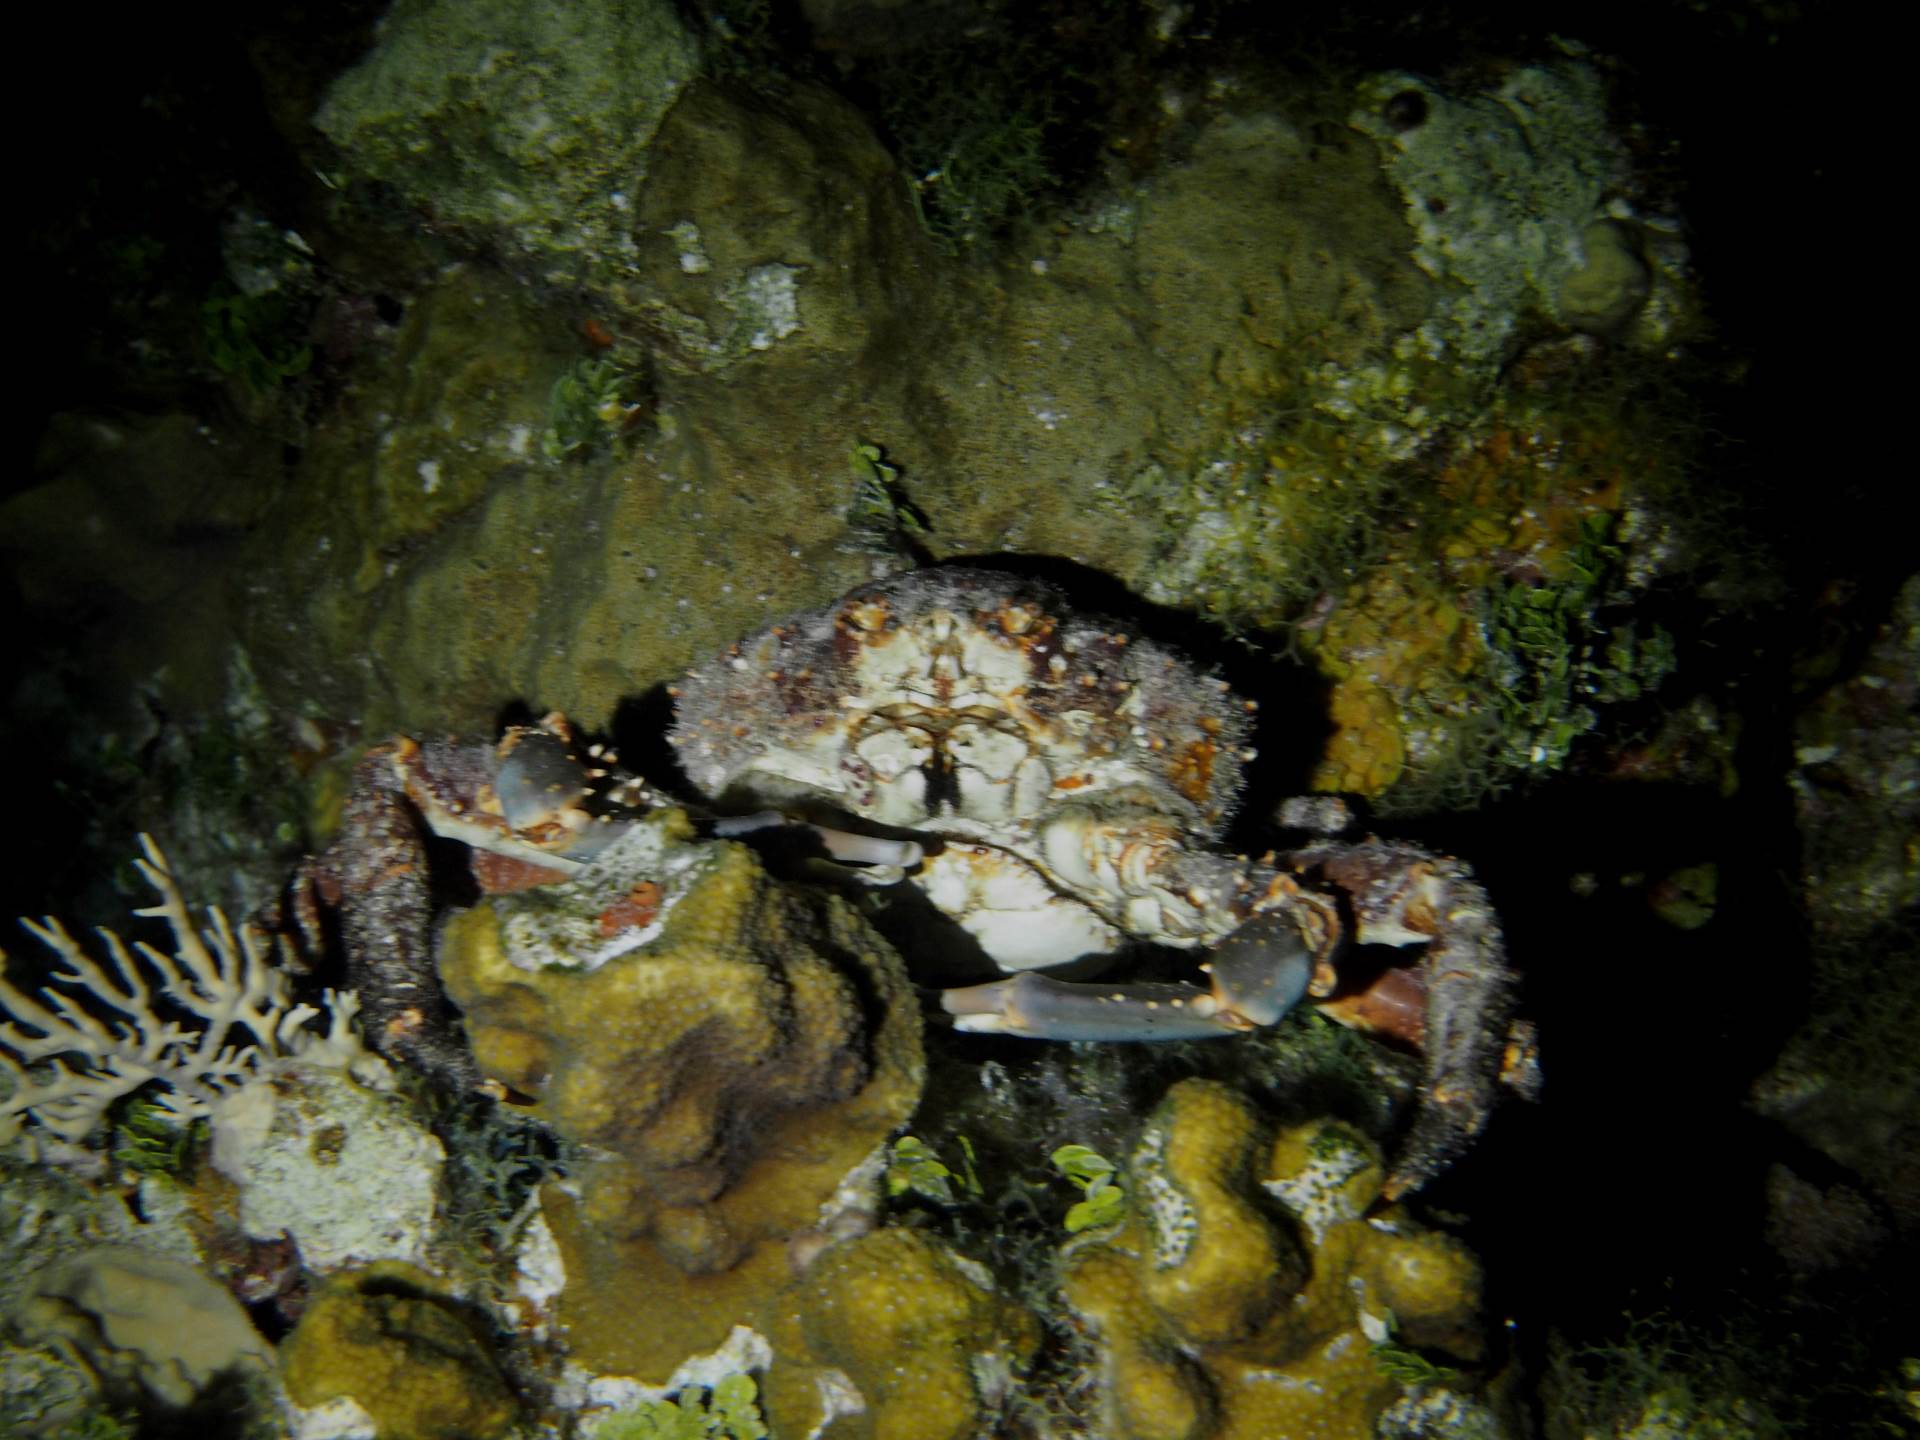 Channel Clining Crab